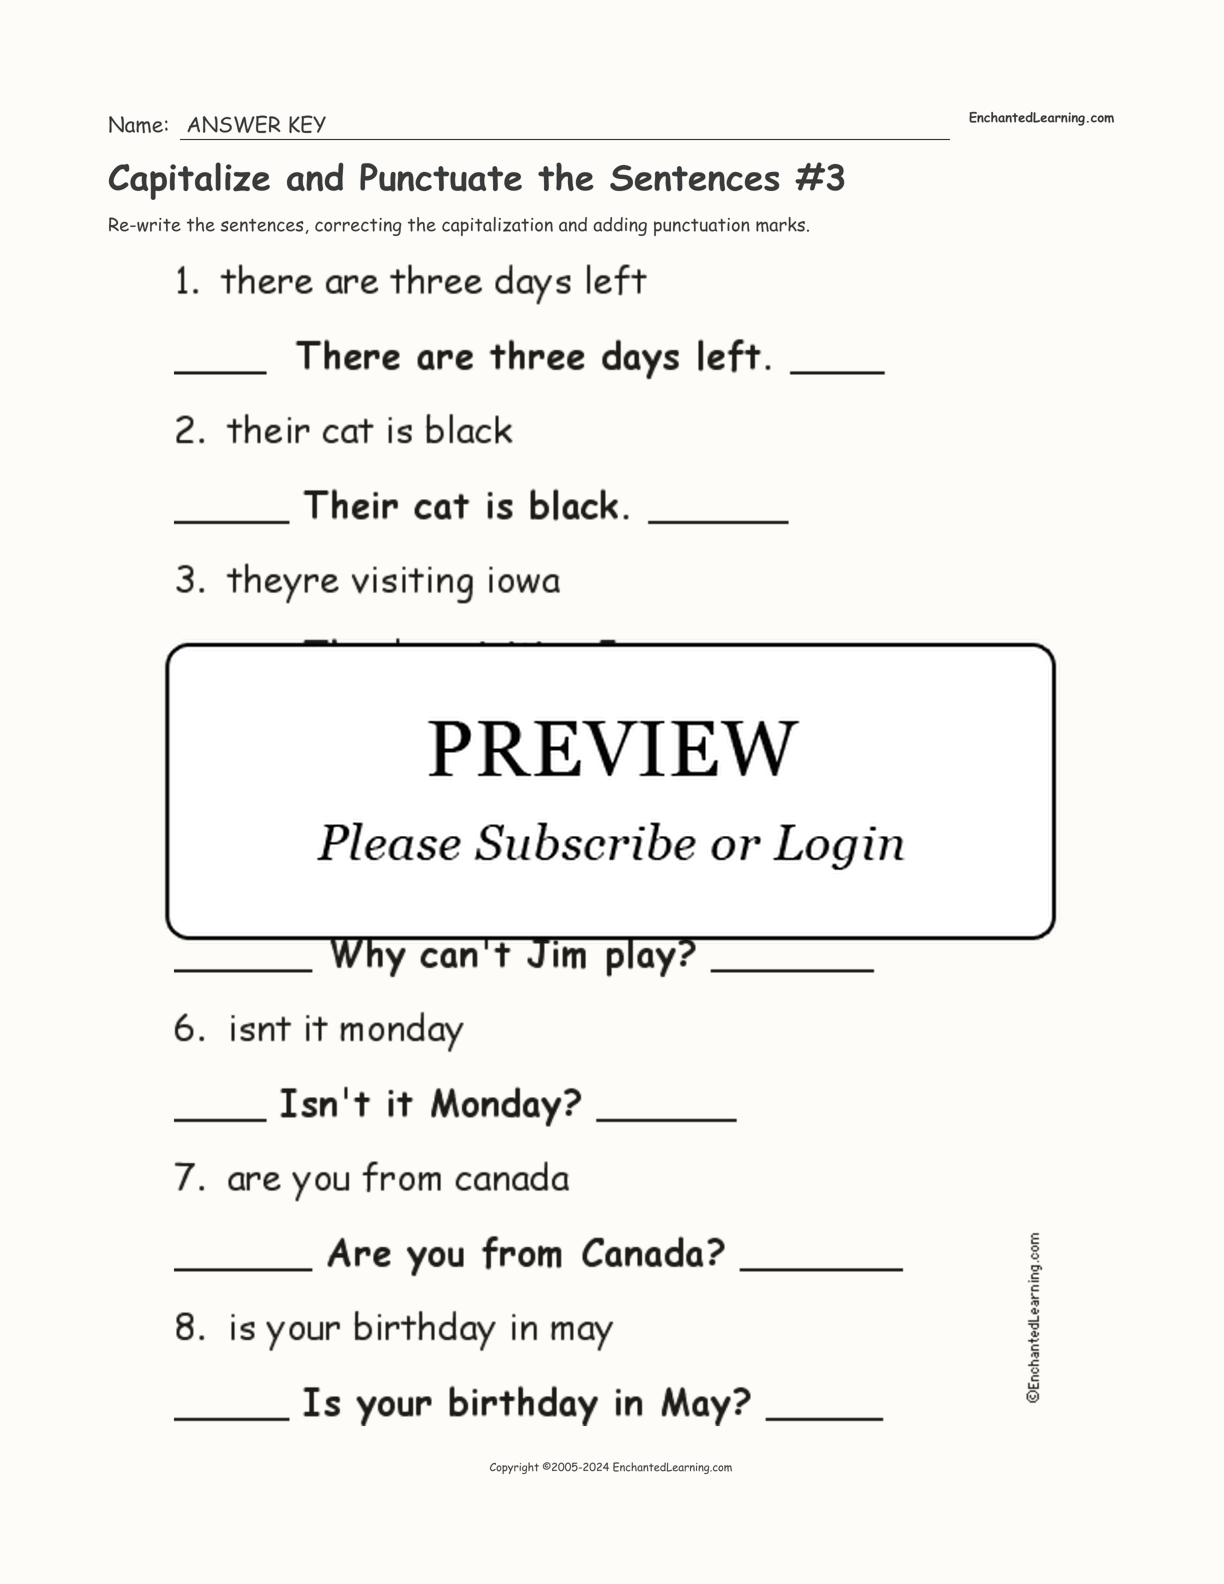 Capitalize and Punctuate the Sentences #3 interactive worksheet page 2